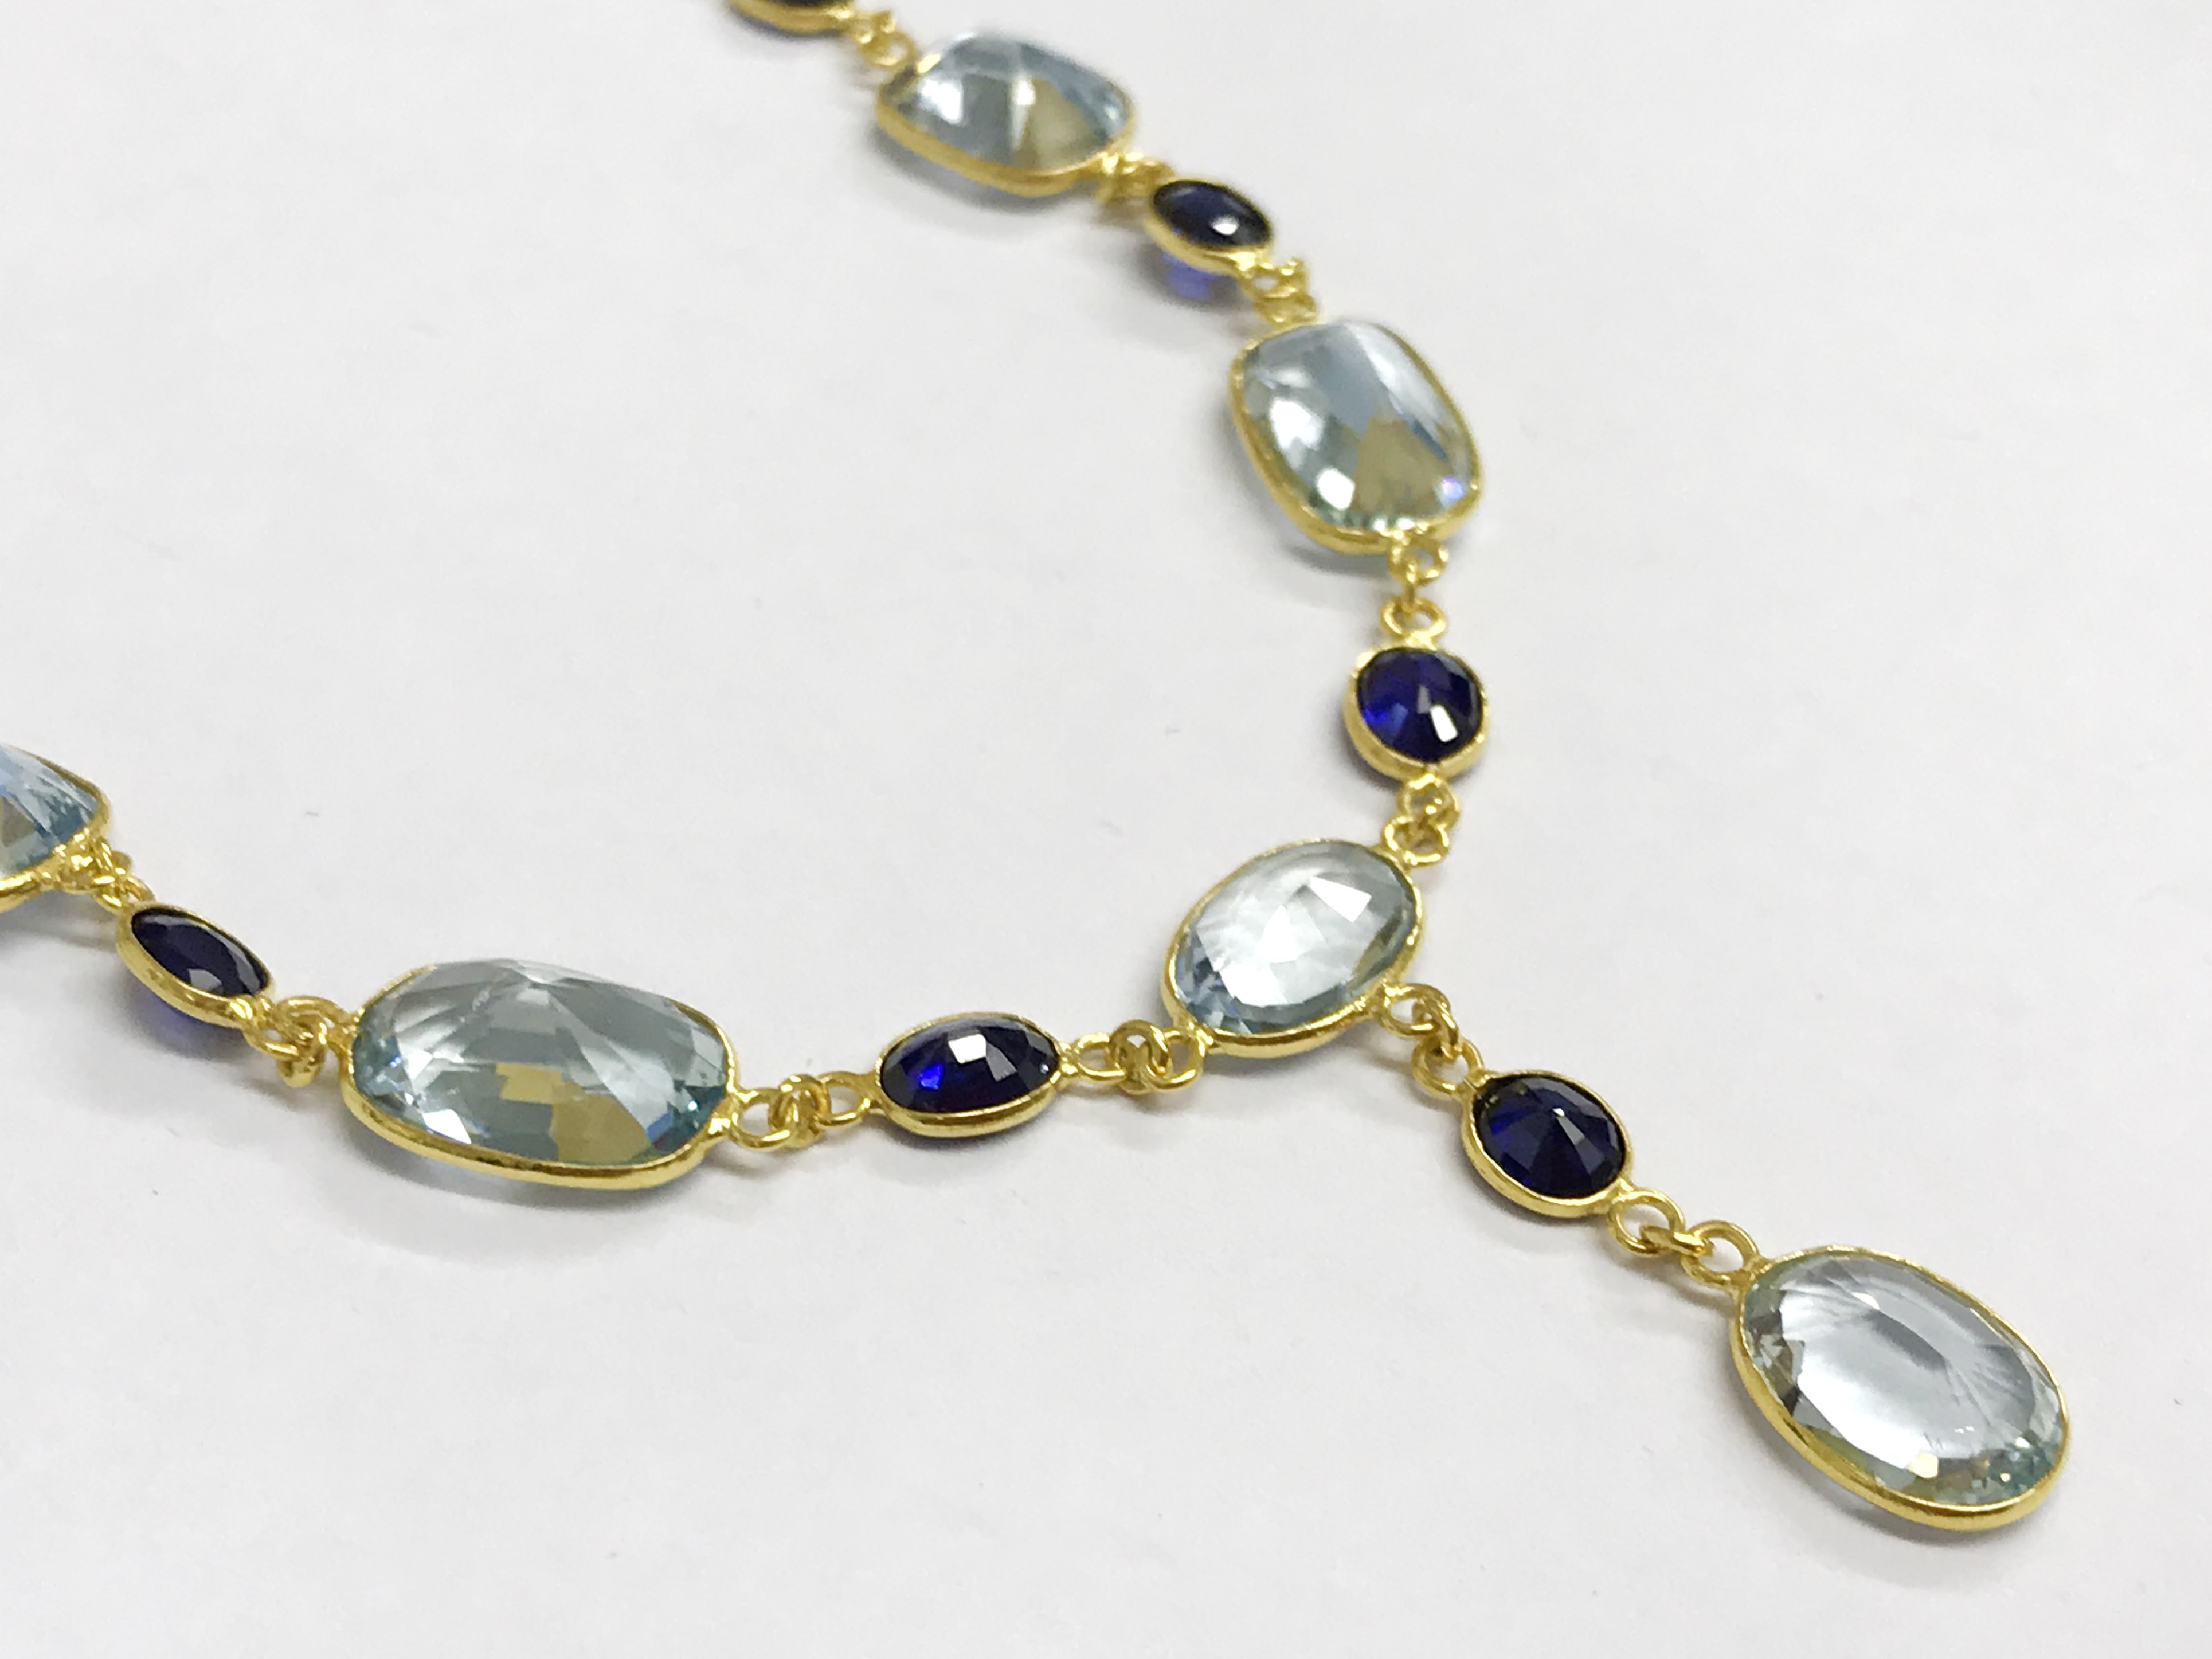 18CT GOLD BLUE TOPAZ NECKLACE - Image 5 of 5